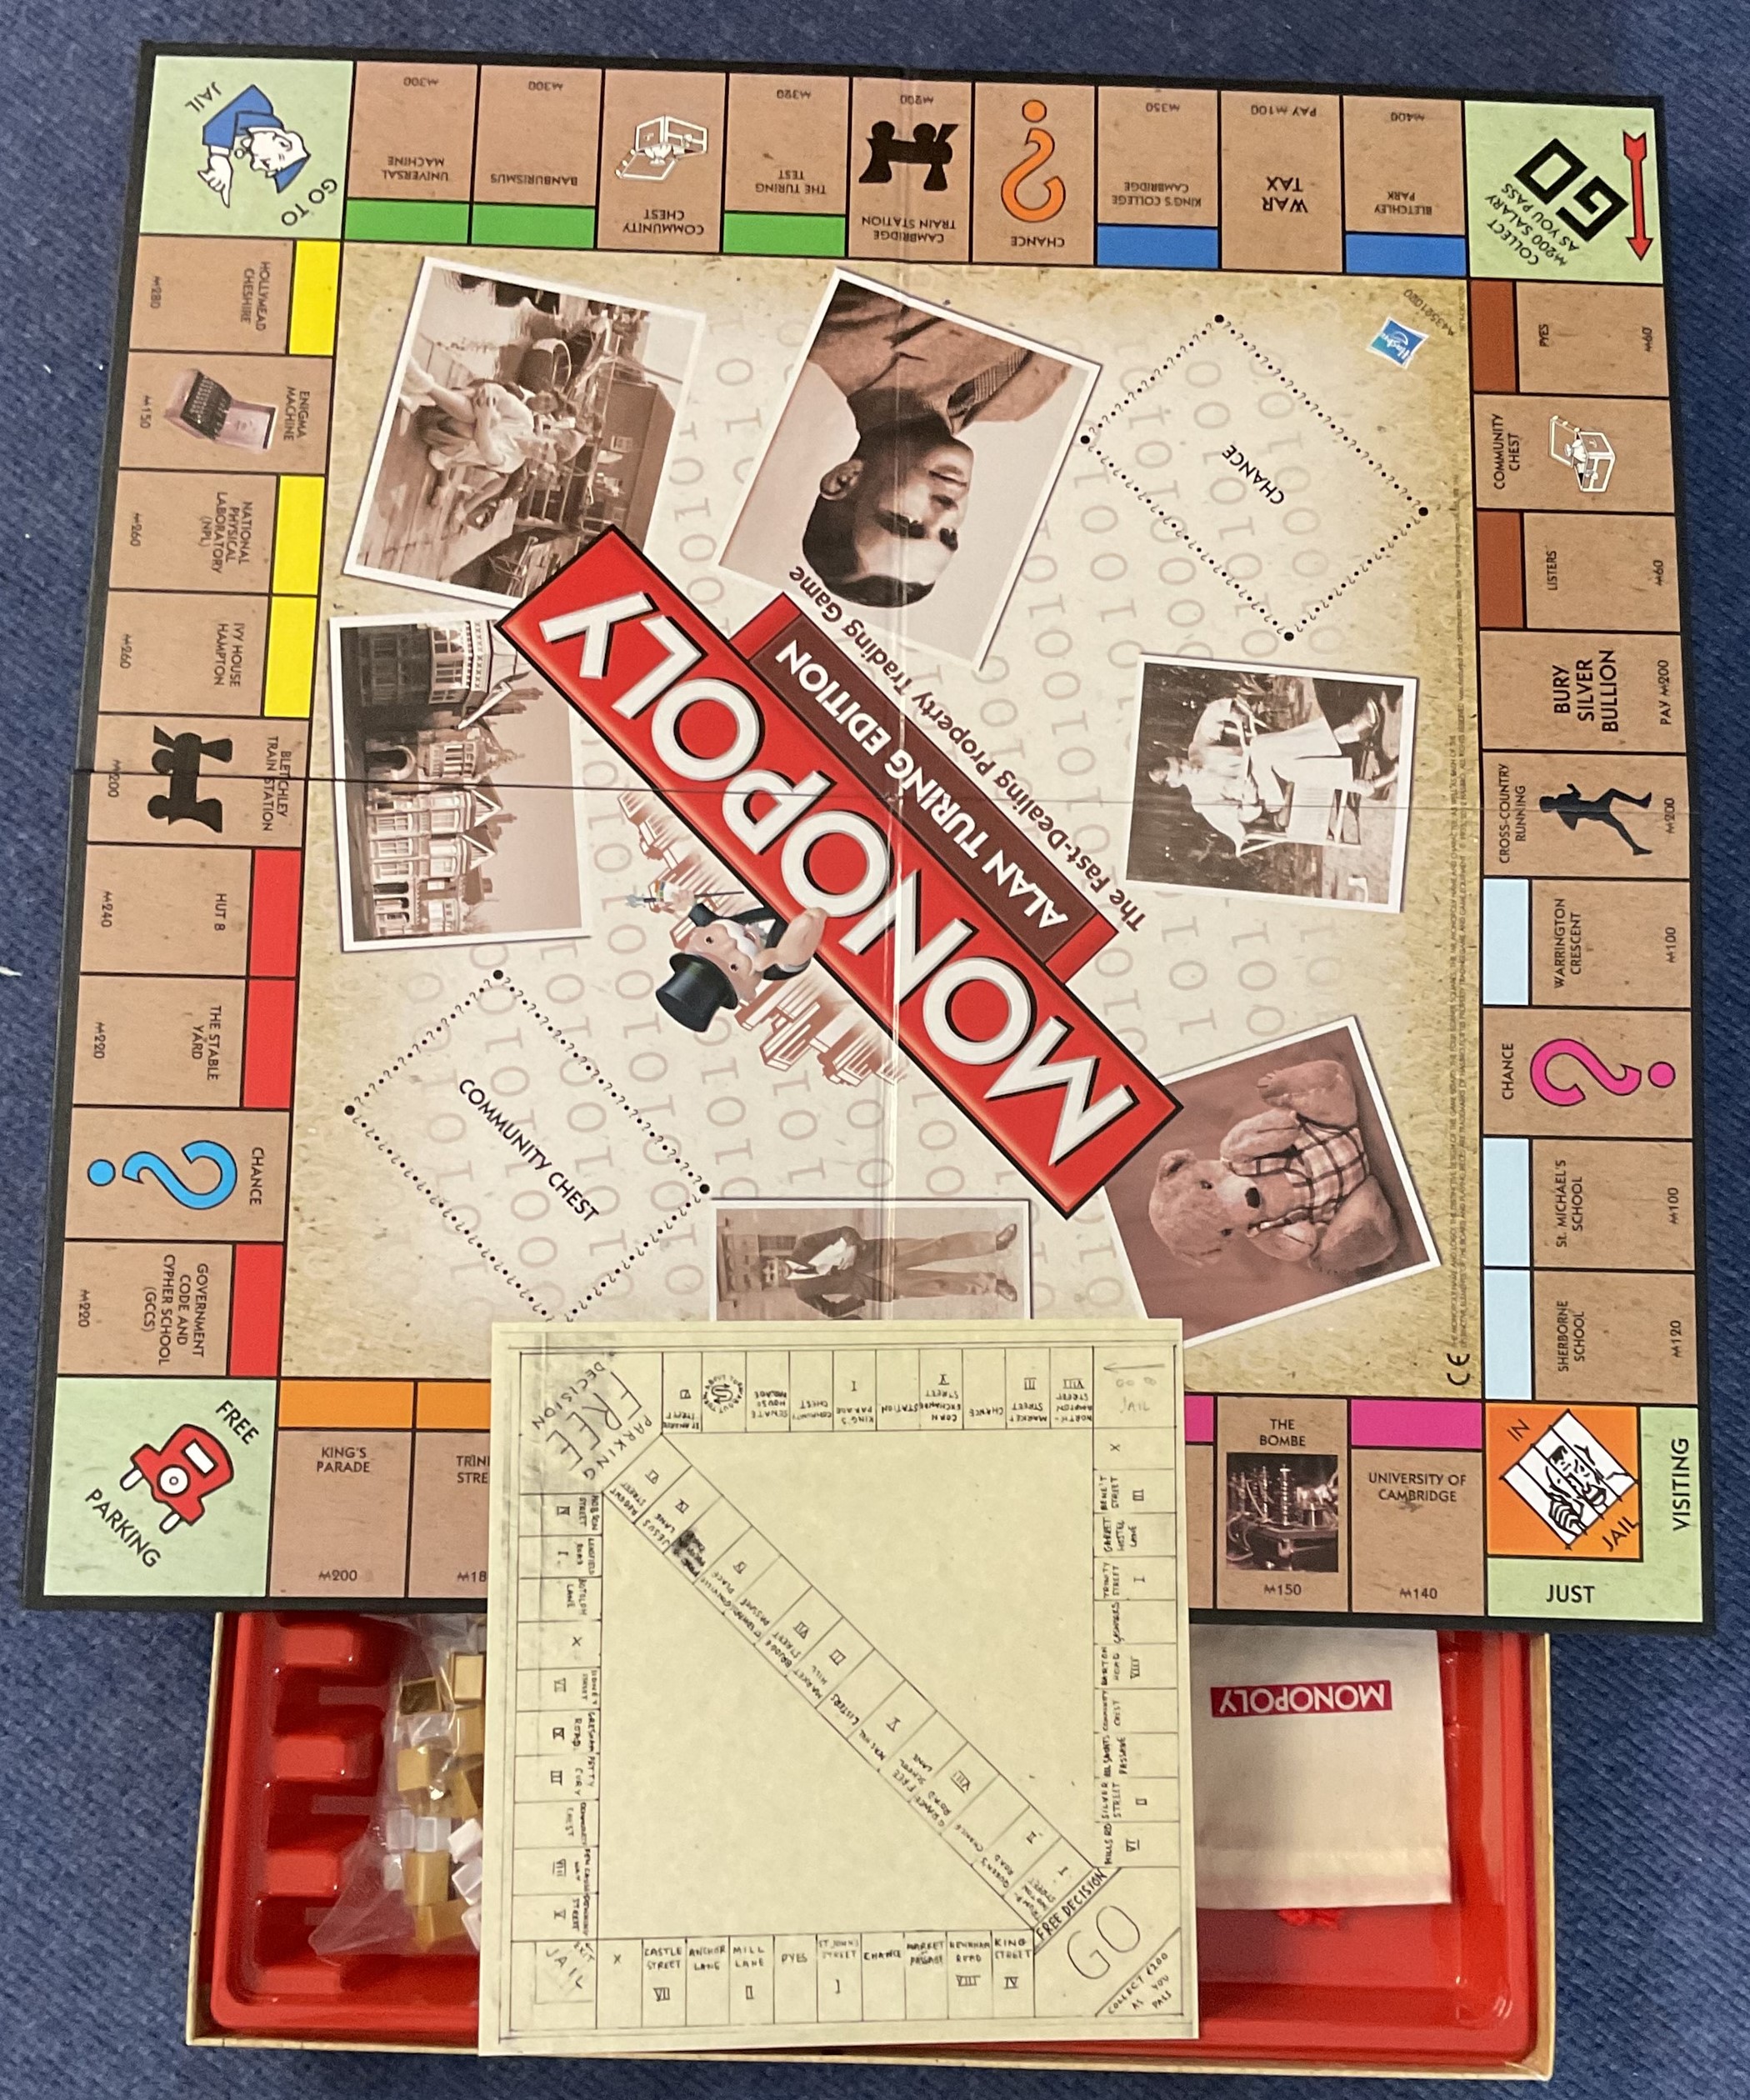 Monopoly game. Alan Turing Edition. Contains original Turning board. Produced in 1935 in England. - Image 2 of 2